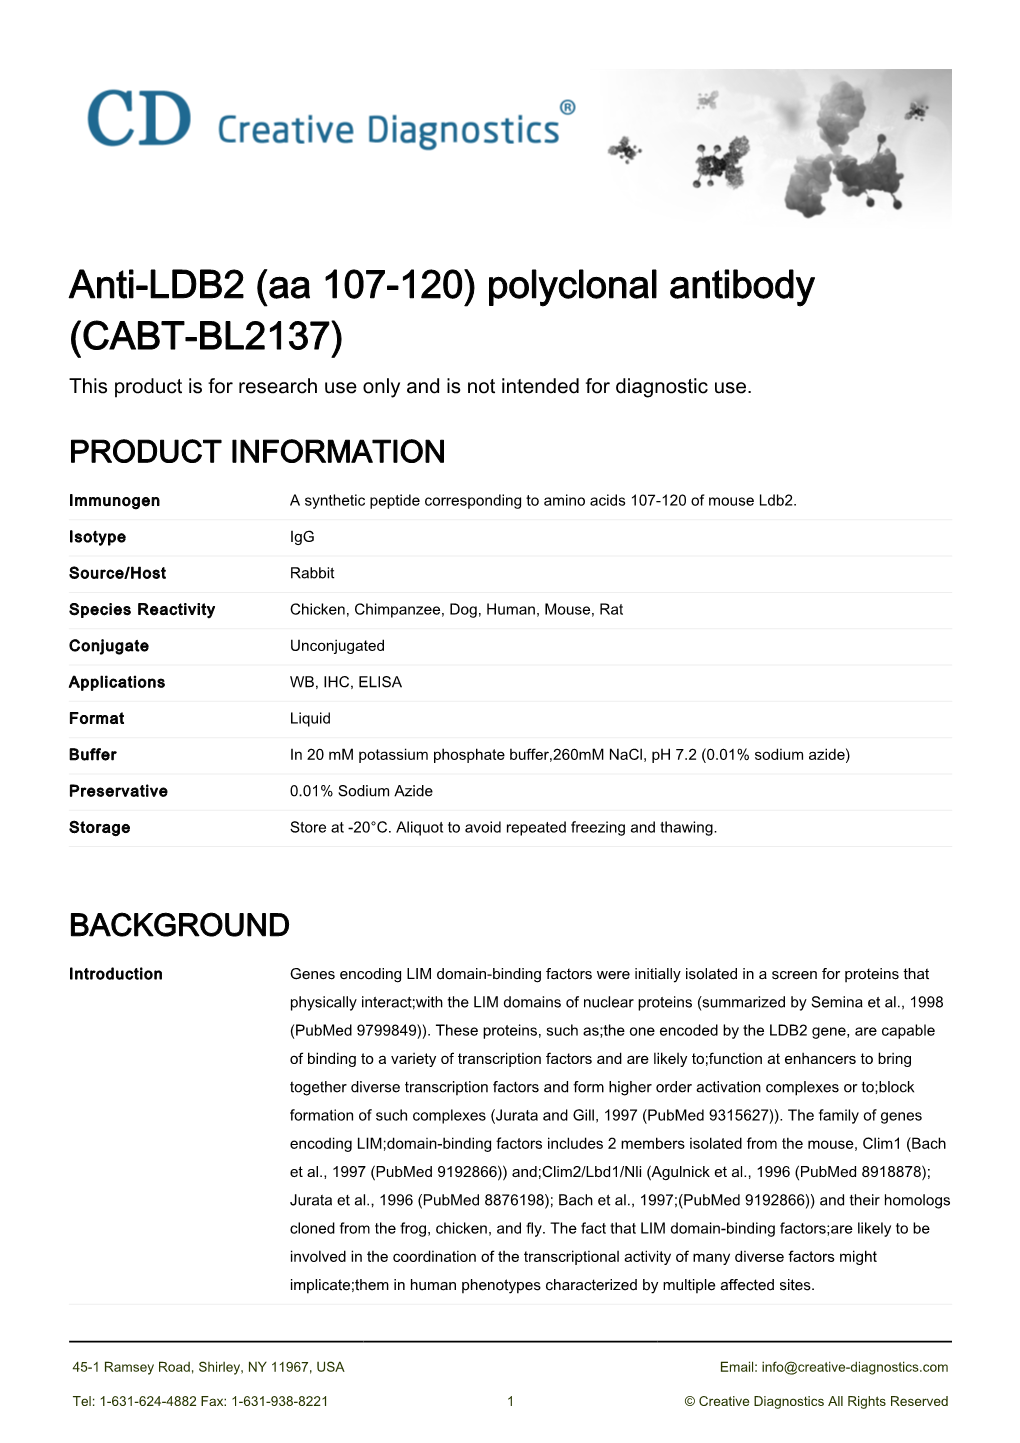 Anti-LDB2 (Aa 107-120) Polyclonal Antibody (CABT-BL2137) This Product Is for Research Use Only and Is Not Intended for Diagnostic Use